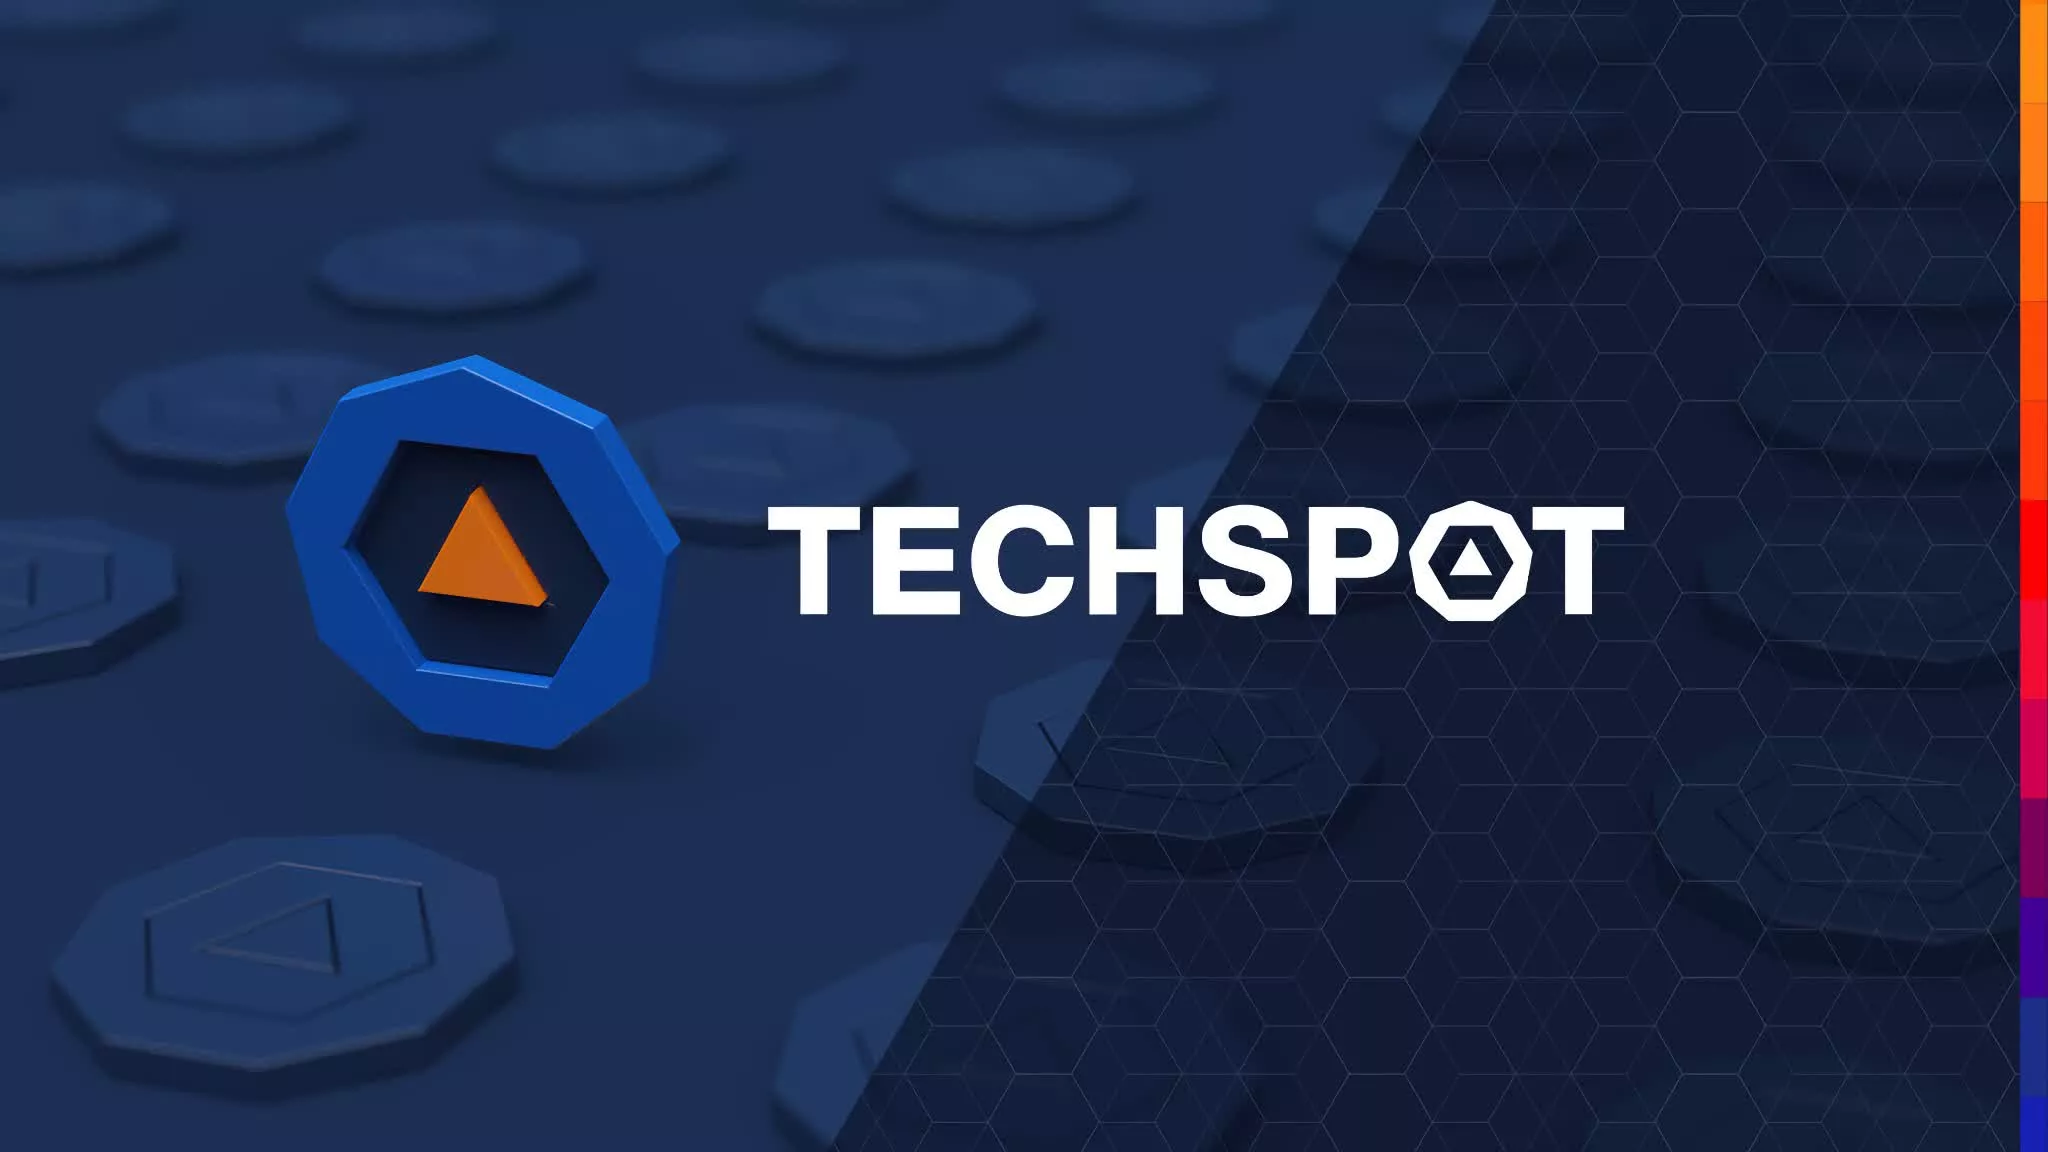 TechSpot is hiring news reporters, how-to, and feature writers. Join the team!